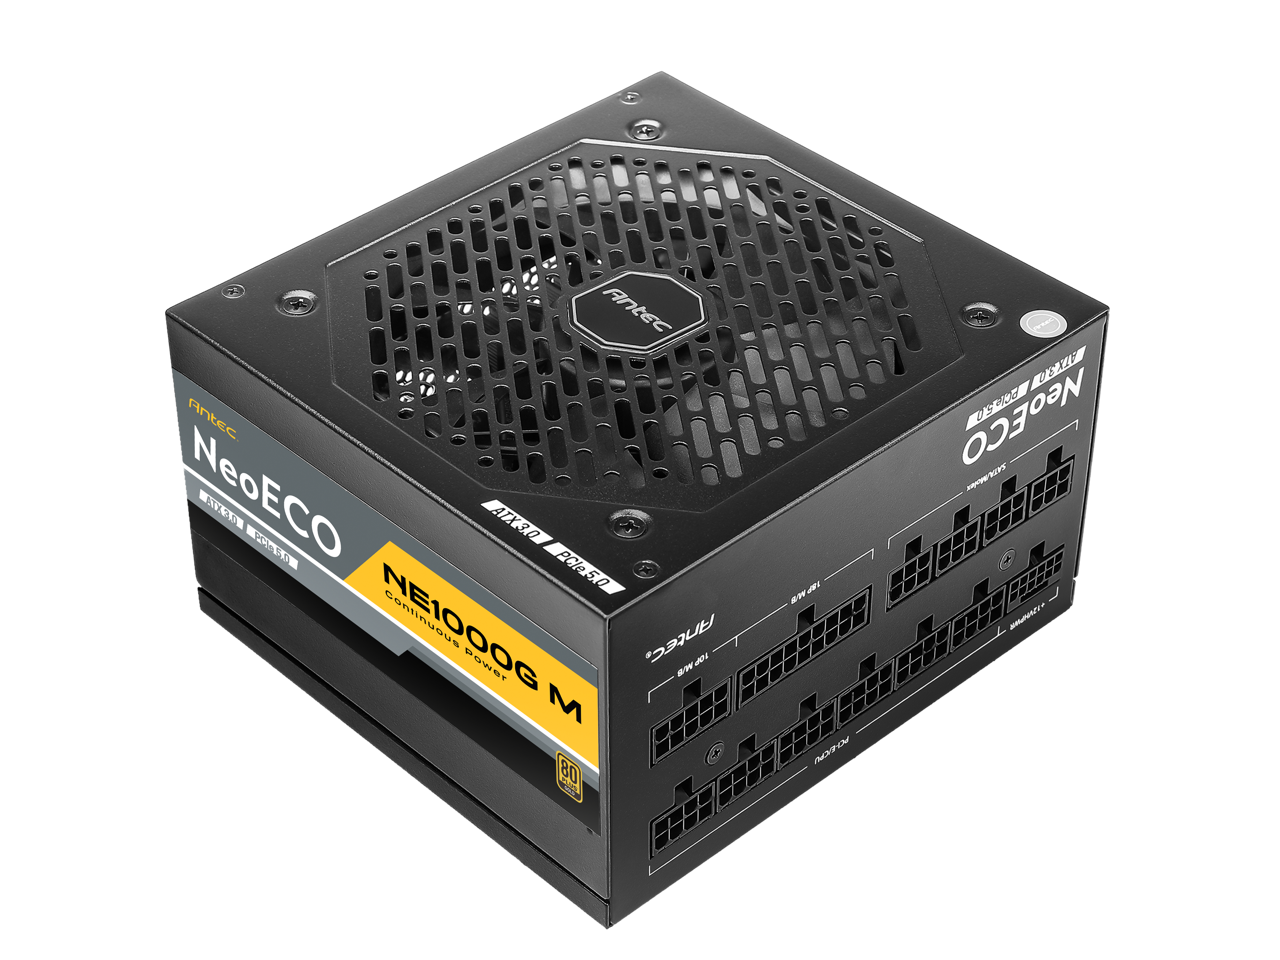 ANTEC NeoECO Series NE1000G M ATX3.0, 1000W Full Modular PSU, 80 PLUS Gold Certified, PCIE 5.0 Support, PhaseWave Design, Japanese Caps, Zero RPM Manager, Silent 120mm Fan